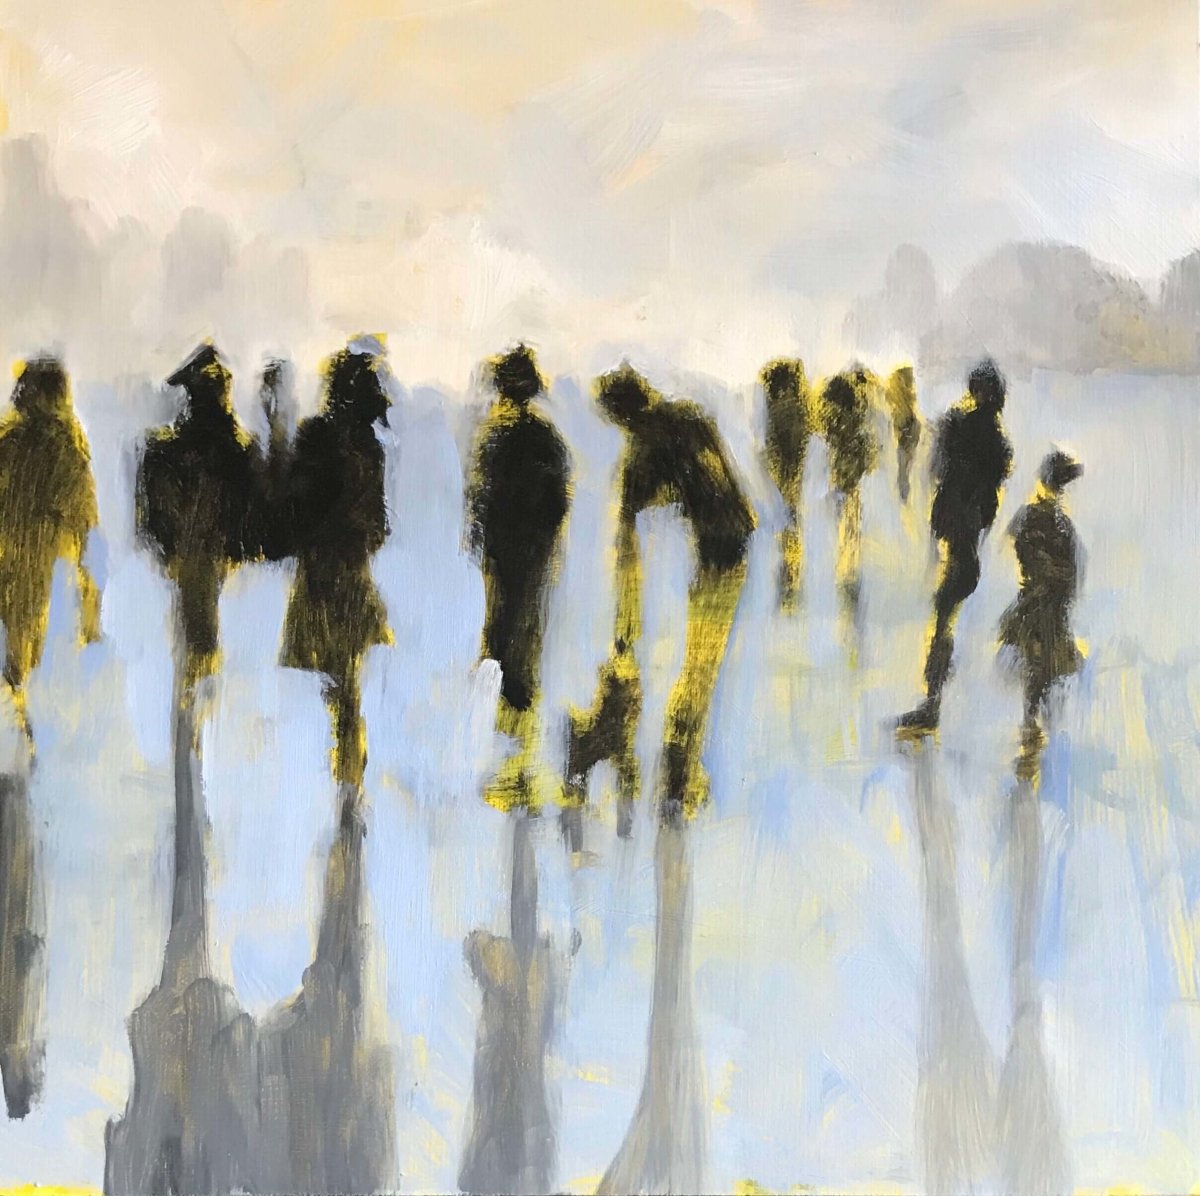 The Doggie Loves Children by Betsy Havens at LePrince Galleries